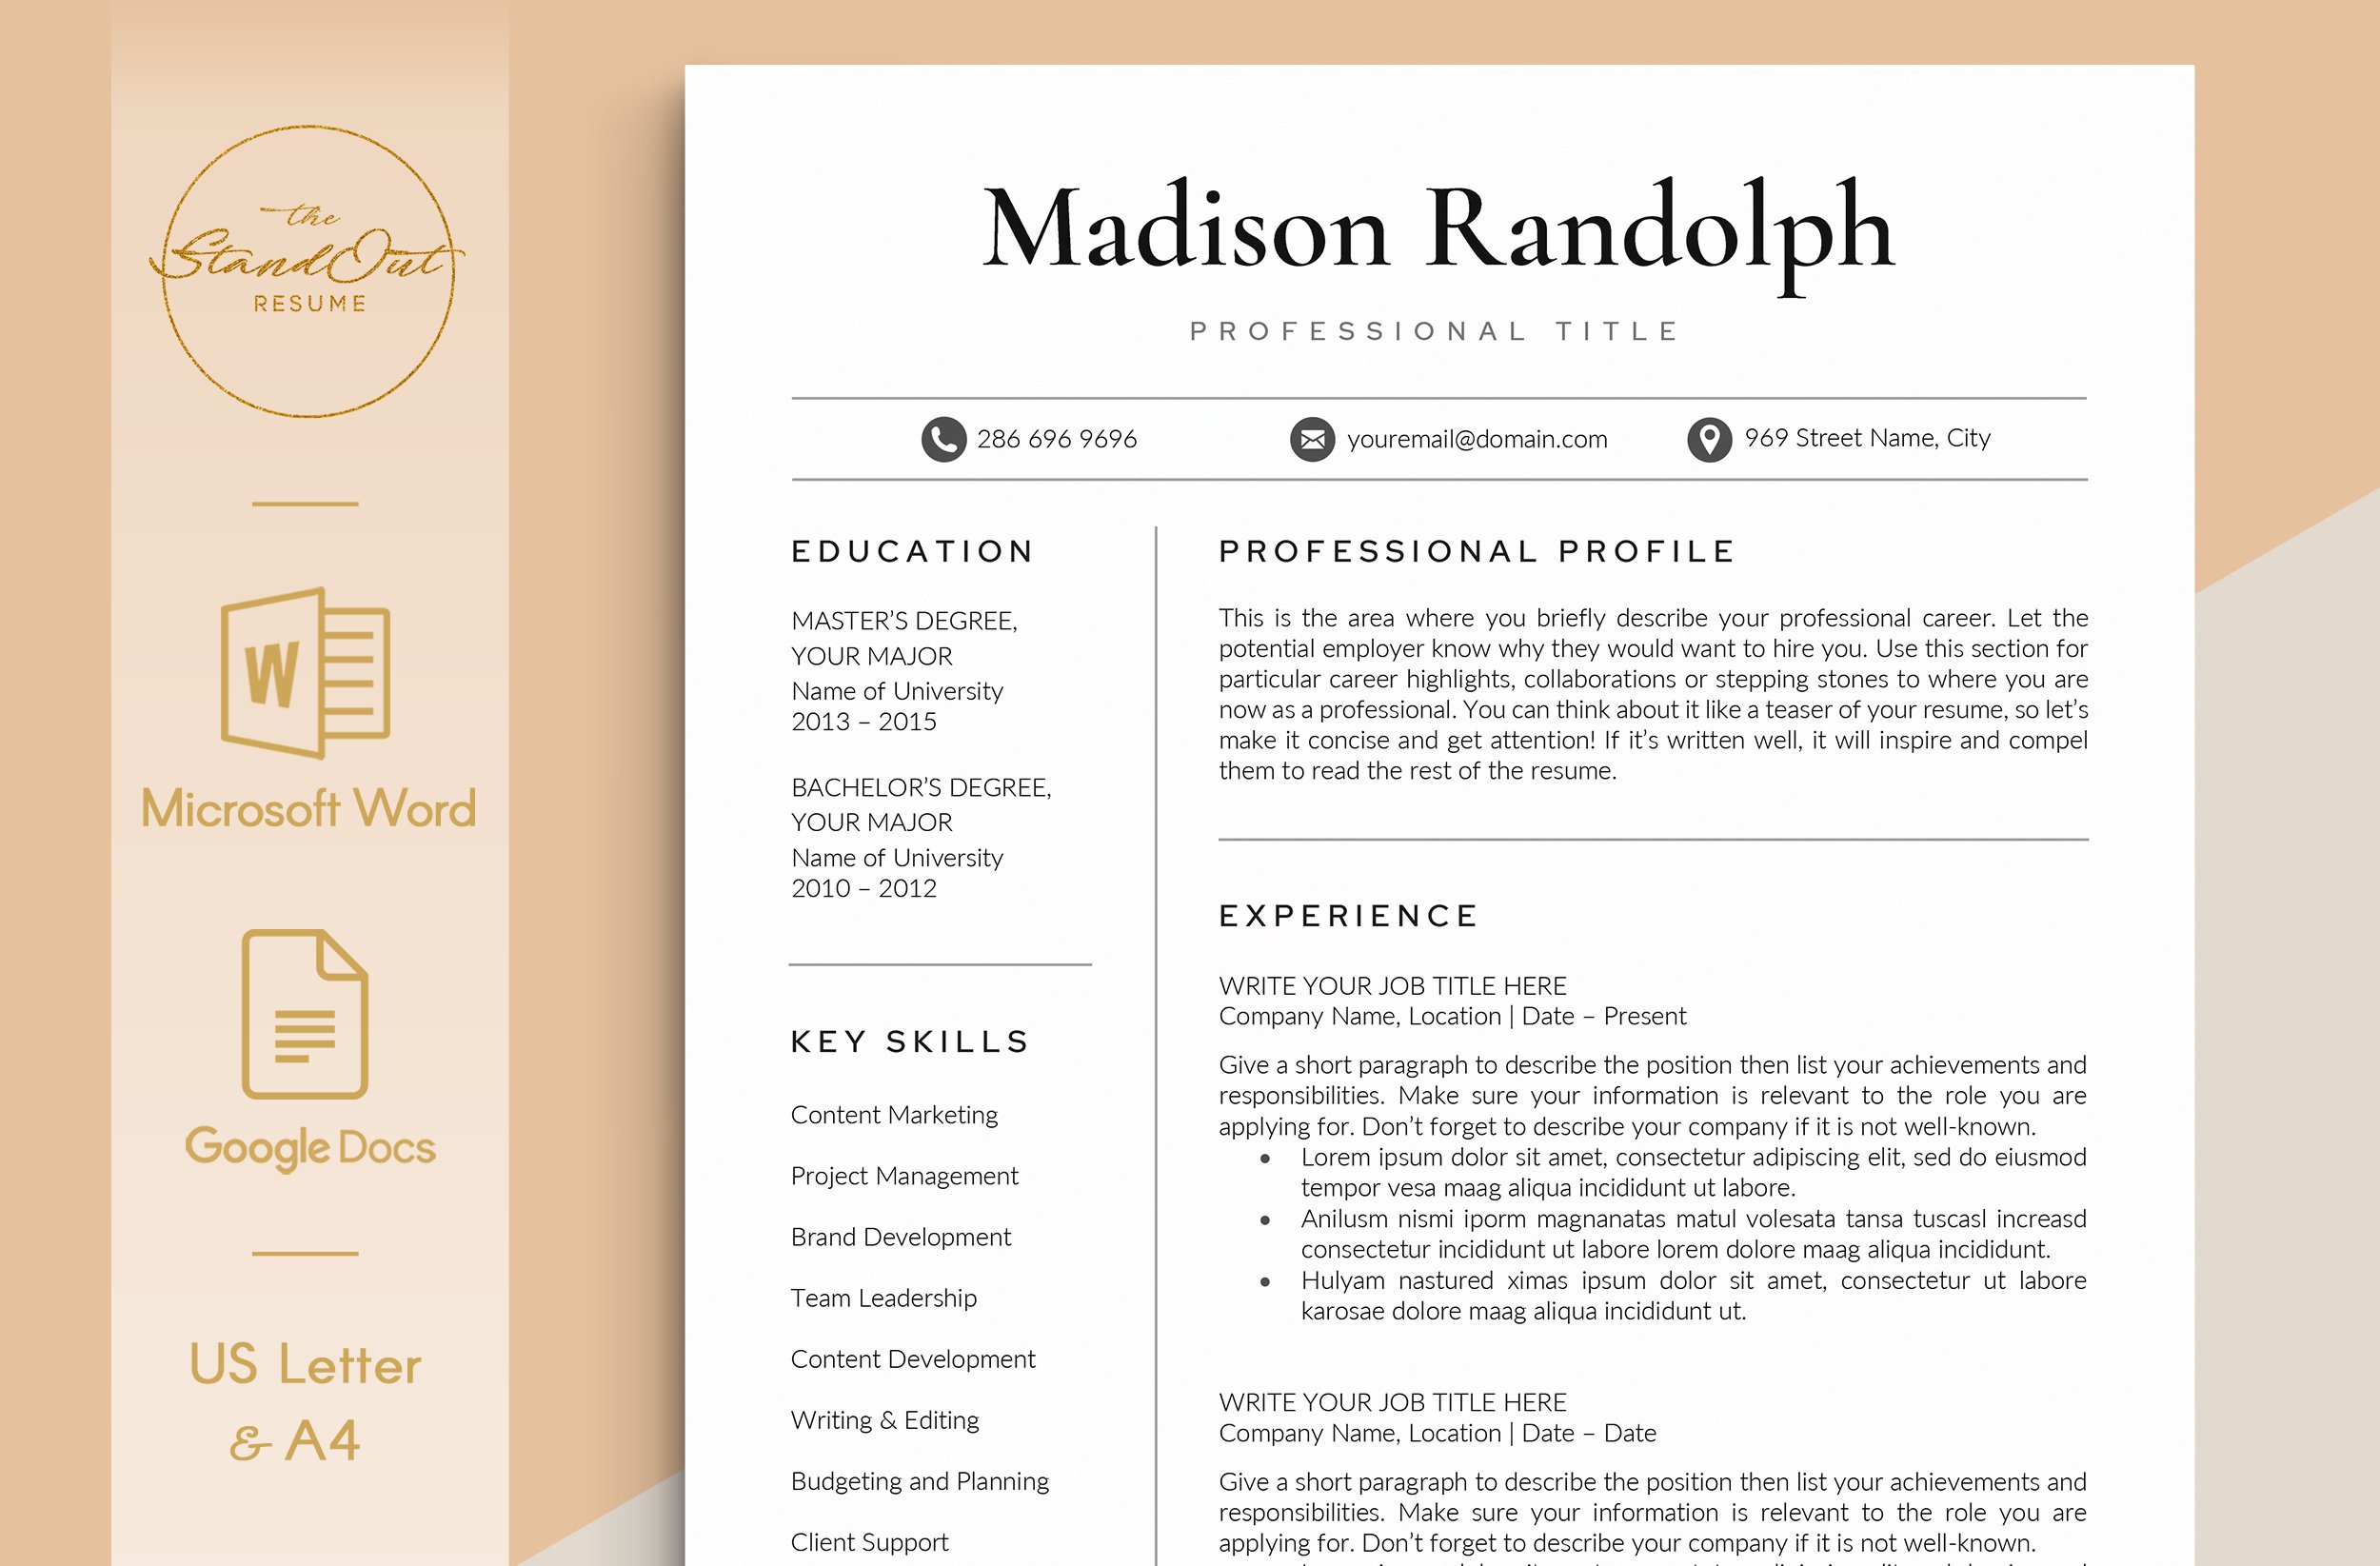 Resume/CV Template - MADISON cover image.